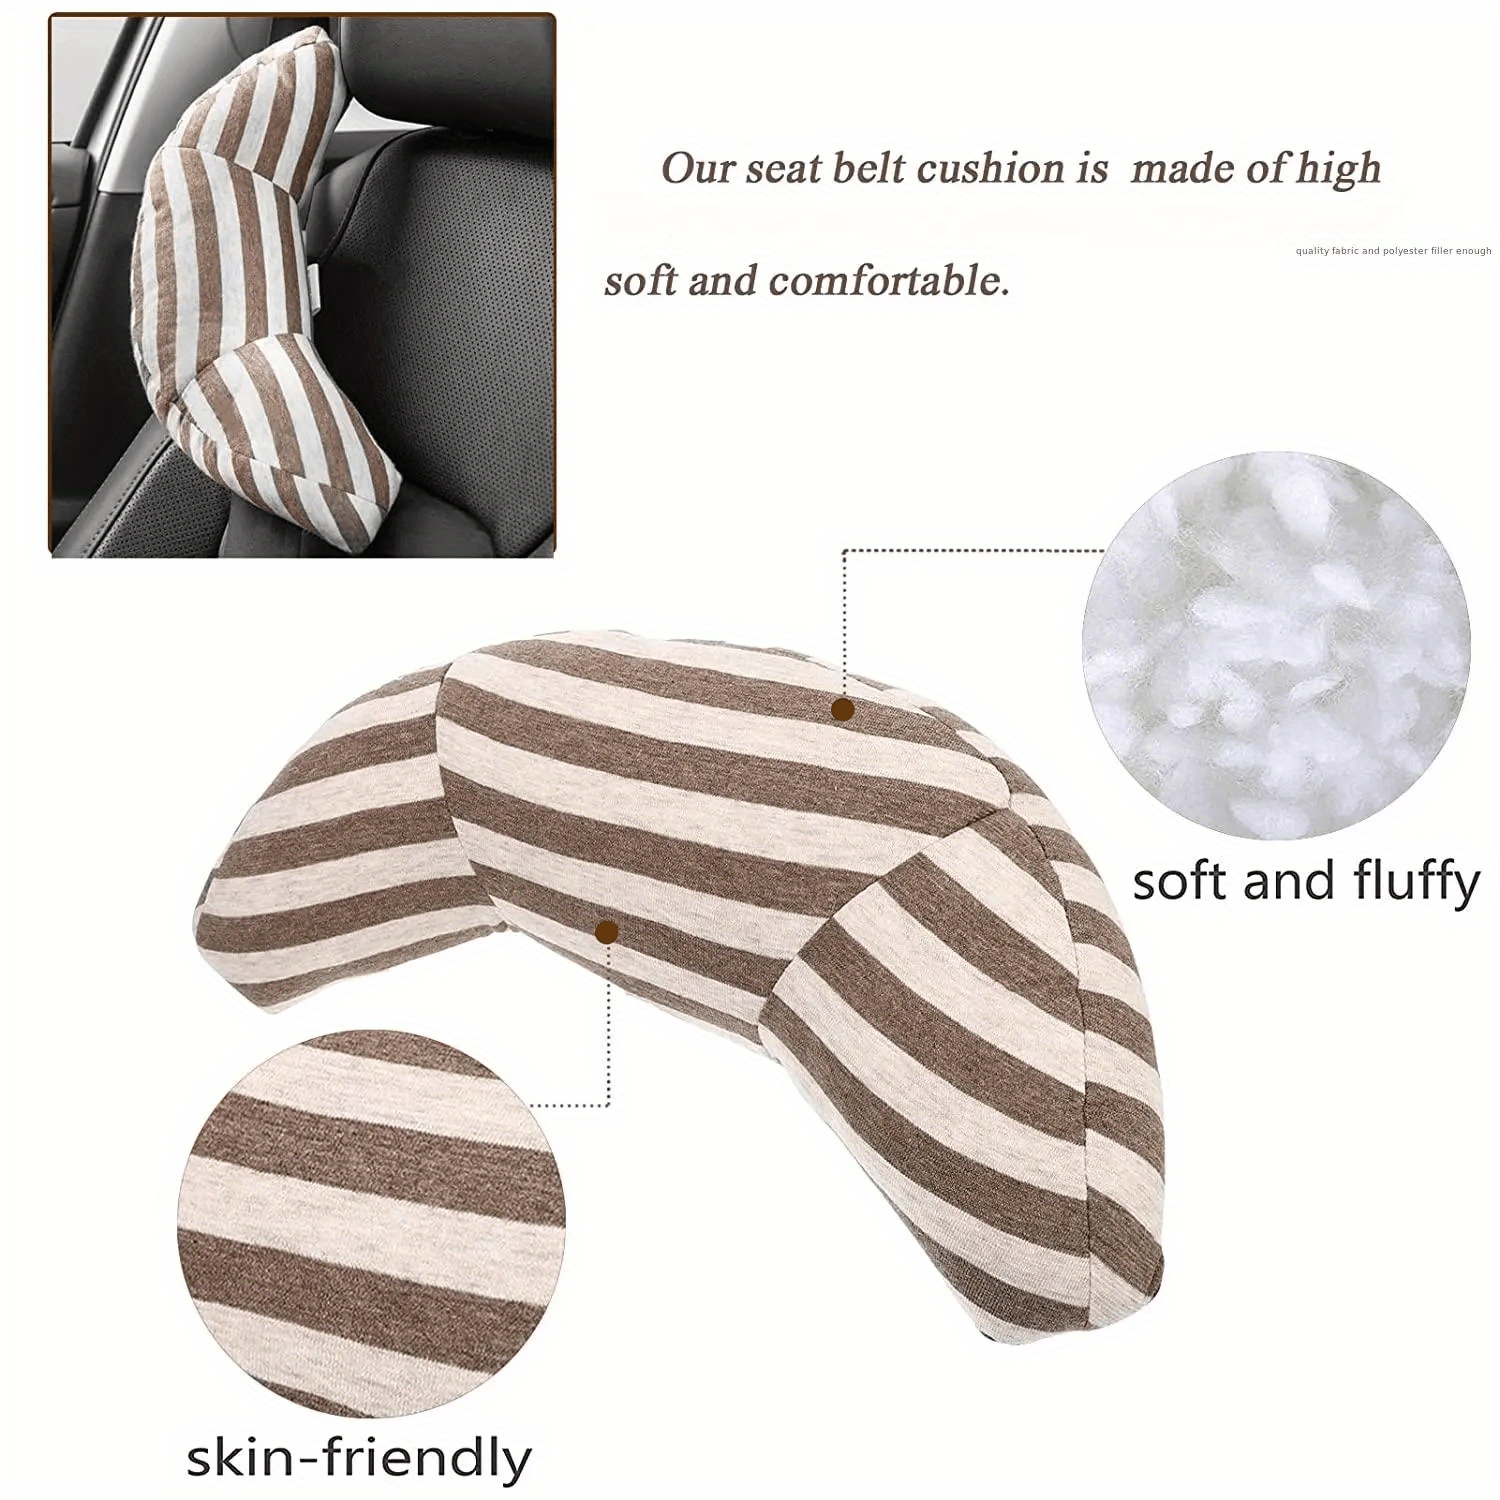 Snuggletime Travel Head and Body Support Cushion